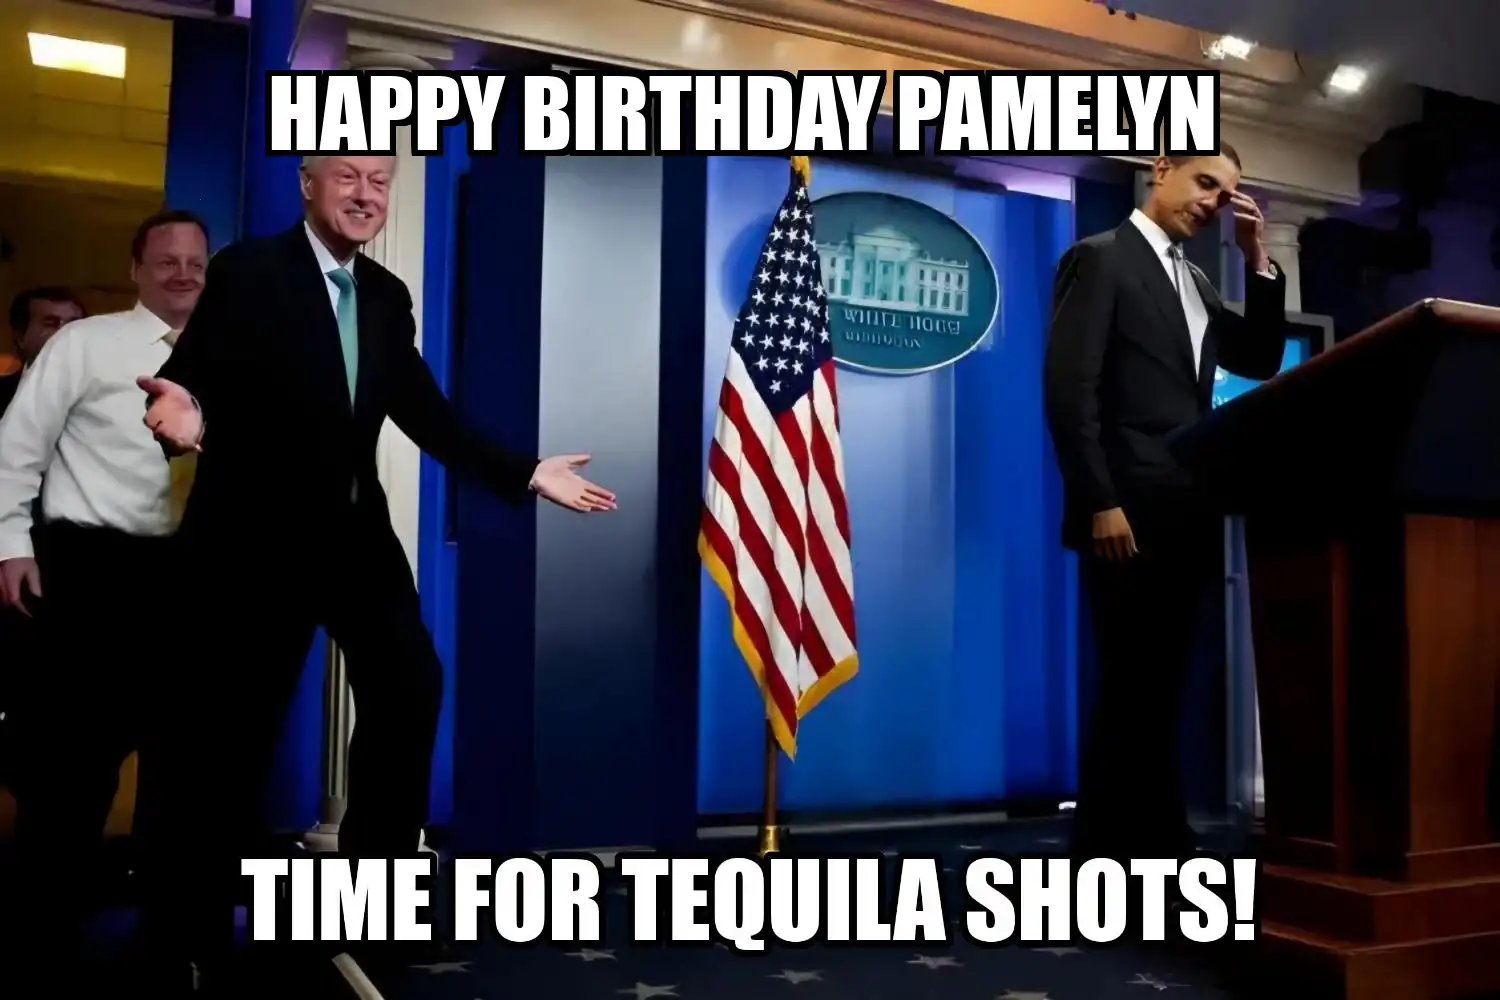 Happy Birthday Pamelyn Time For Tequila Shots Memes